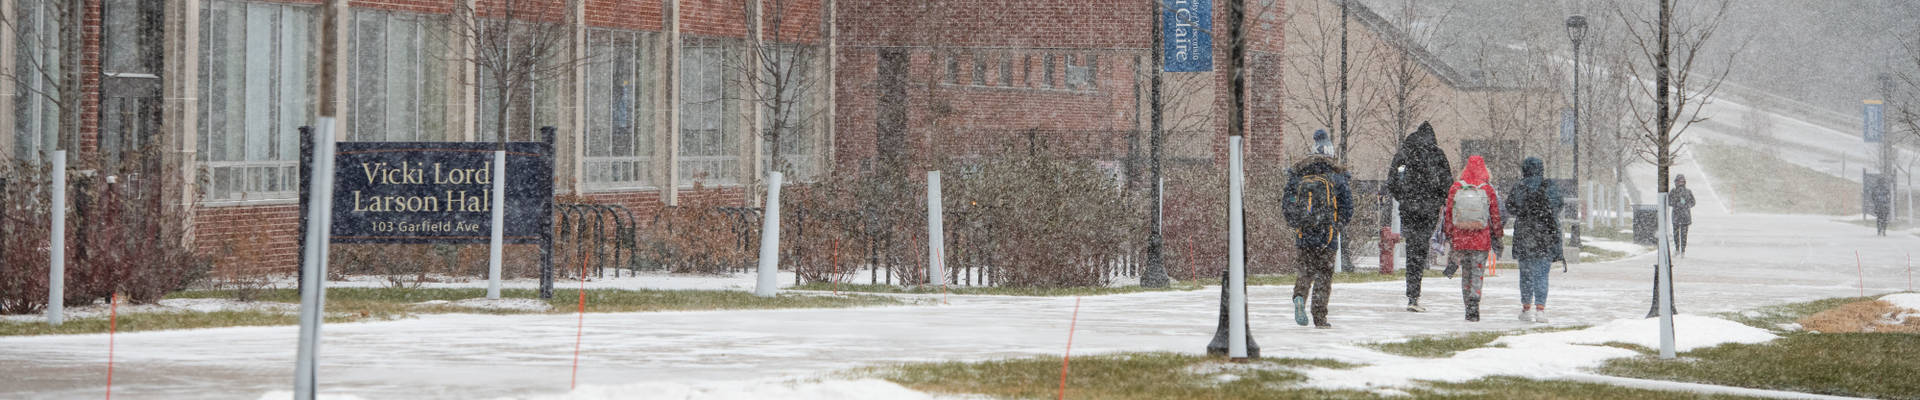 Students make their way through lower campus snow in this winter scene.